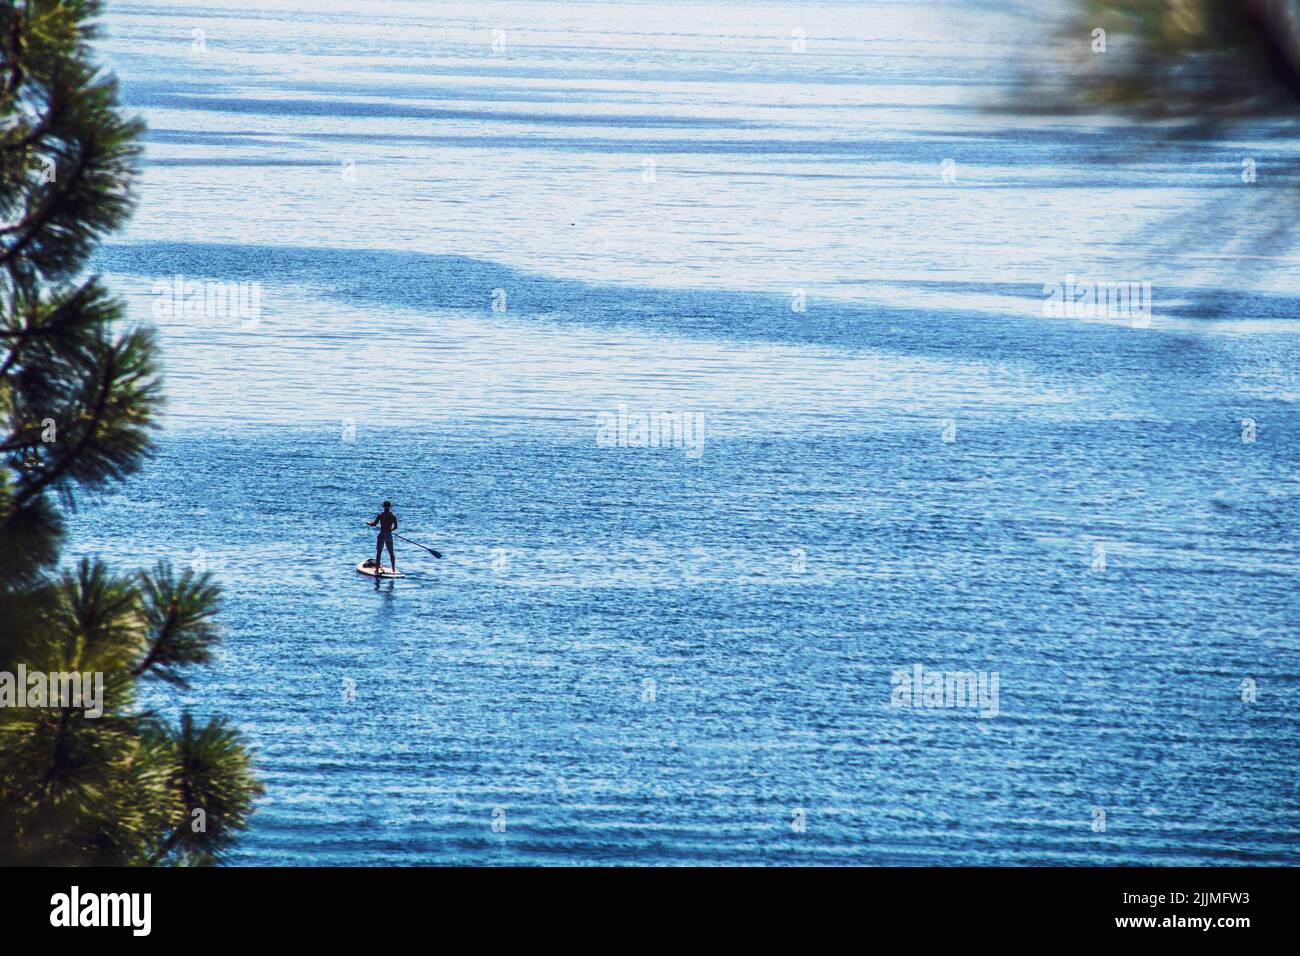 Alone in the blue water of Lake Tahoe, a lone man stands on paddleboard headed away from shore - framed by bokeh evergreen trees Stock Photo